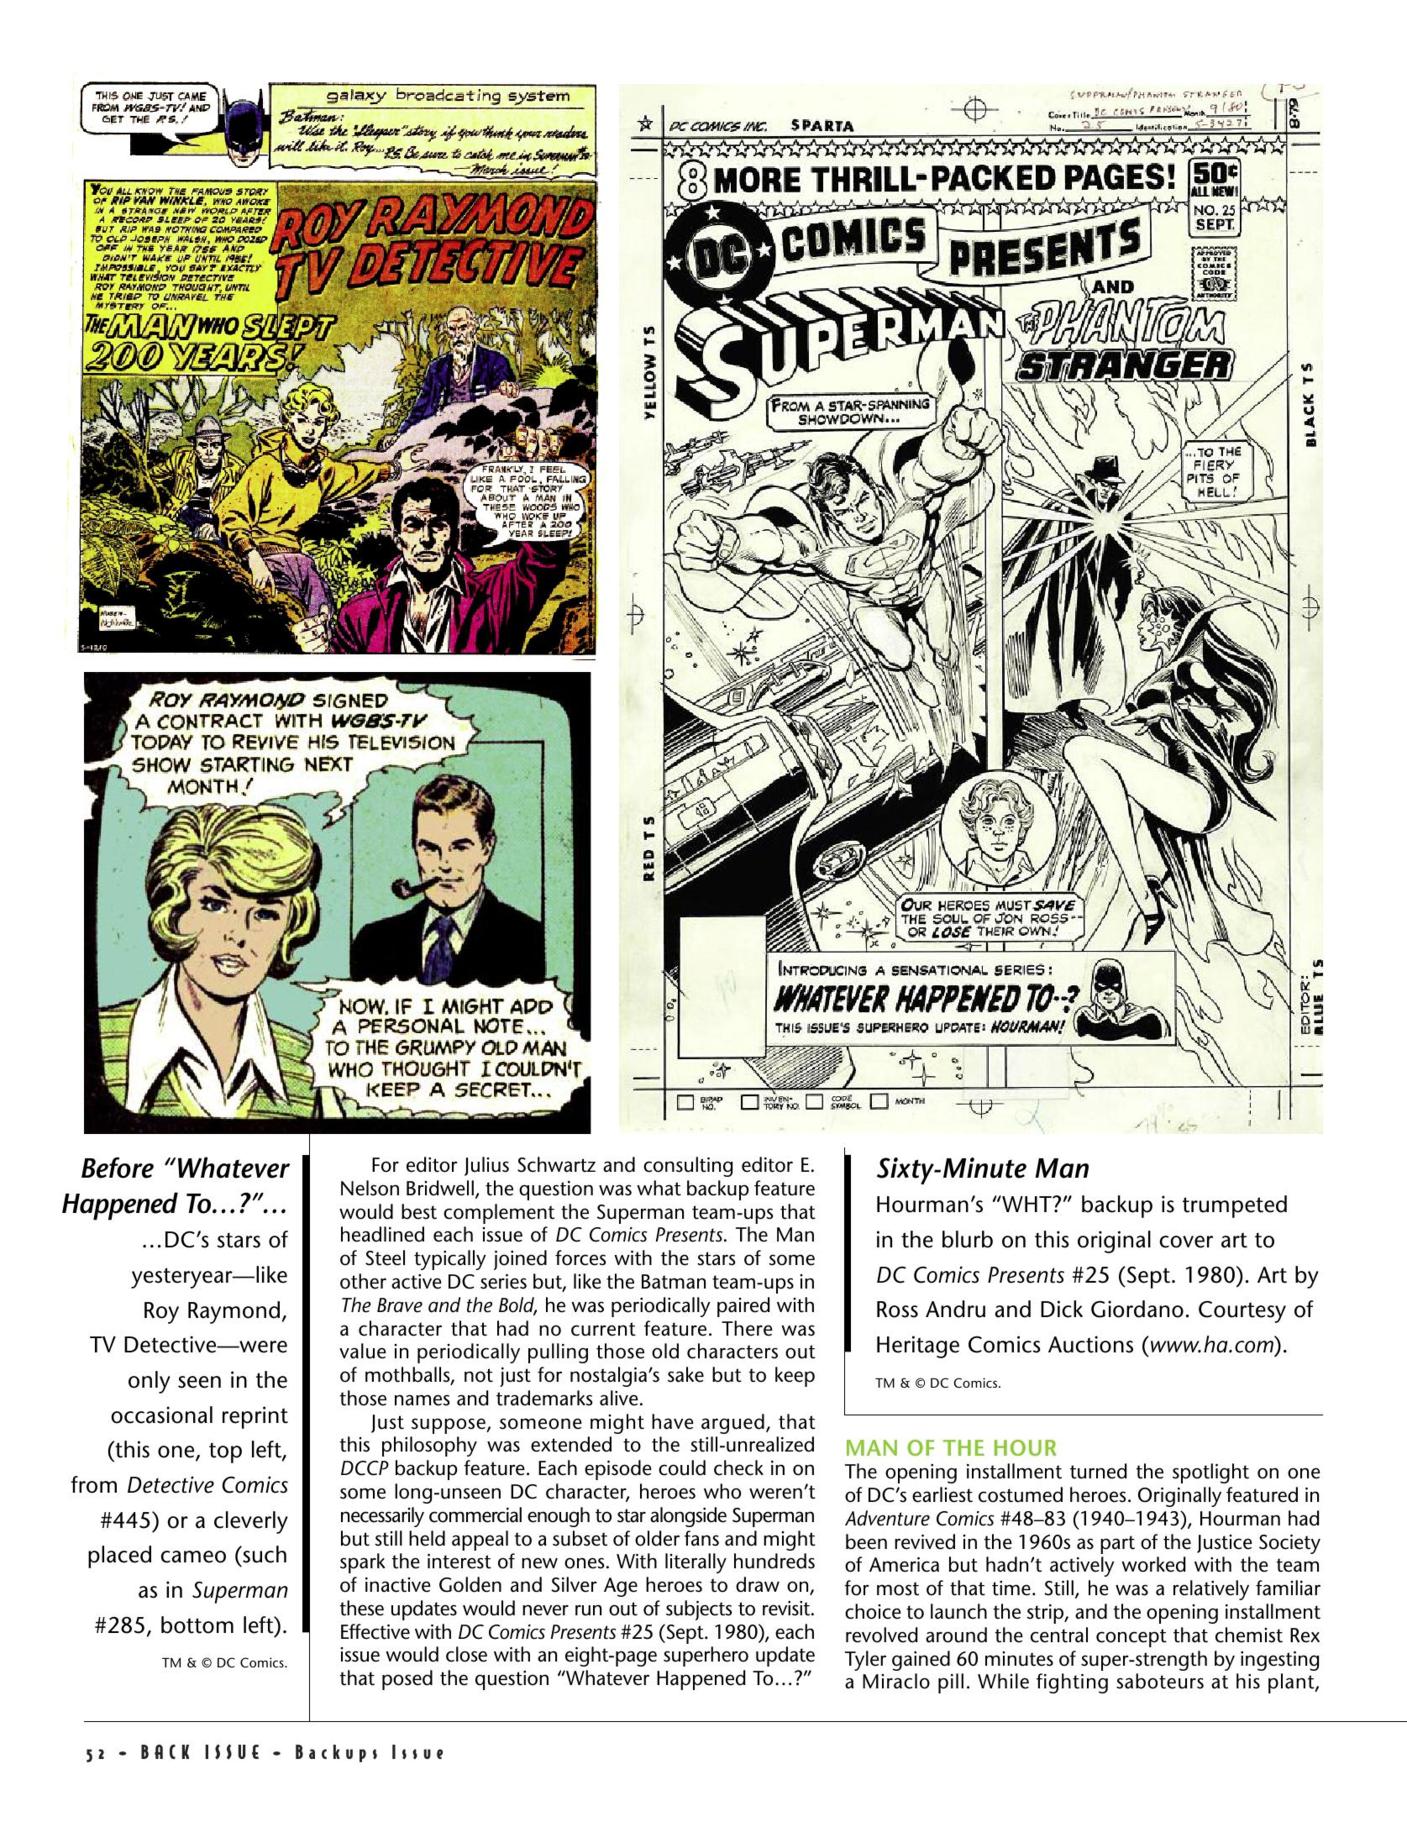 Read online Back Issue comic -  Issue #64 - 54